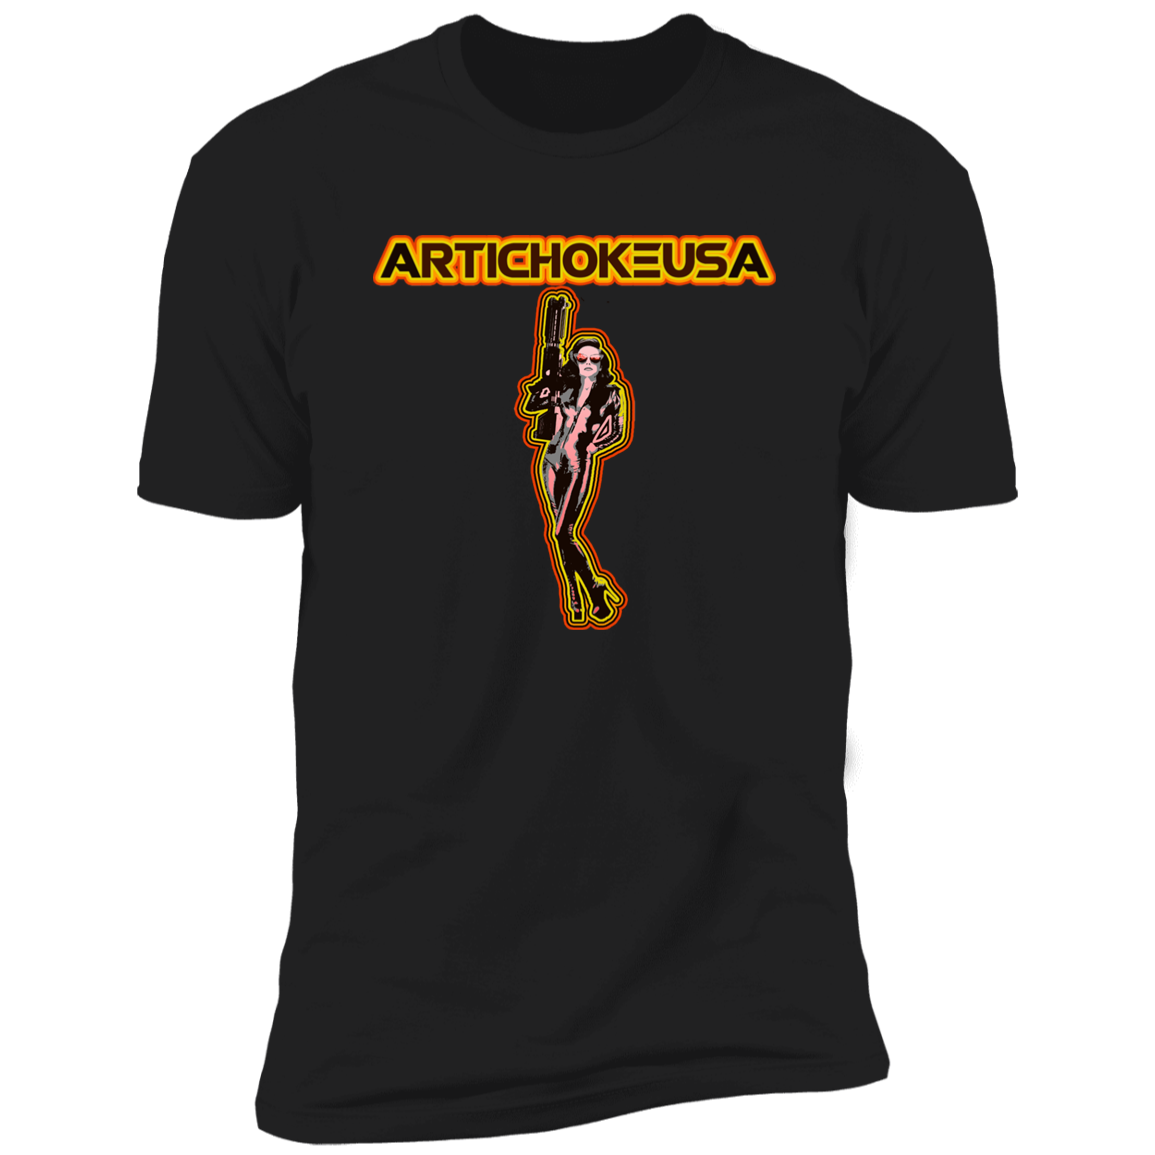 ArtichokeUSA Character and Font design. Let's Create Your Own Team Design Today. Mary Boom Boom. Men's Premium Short Sleeve T-Shirt